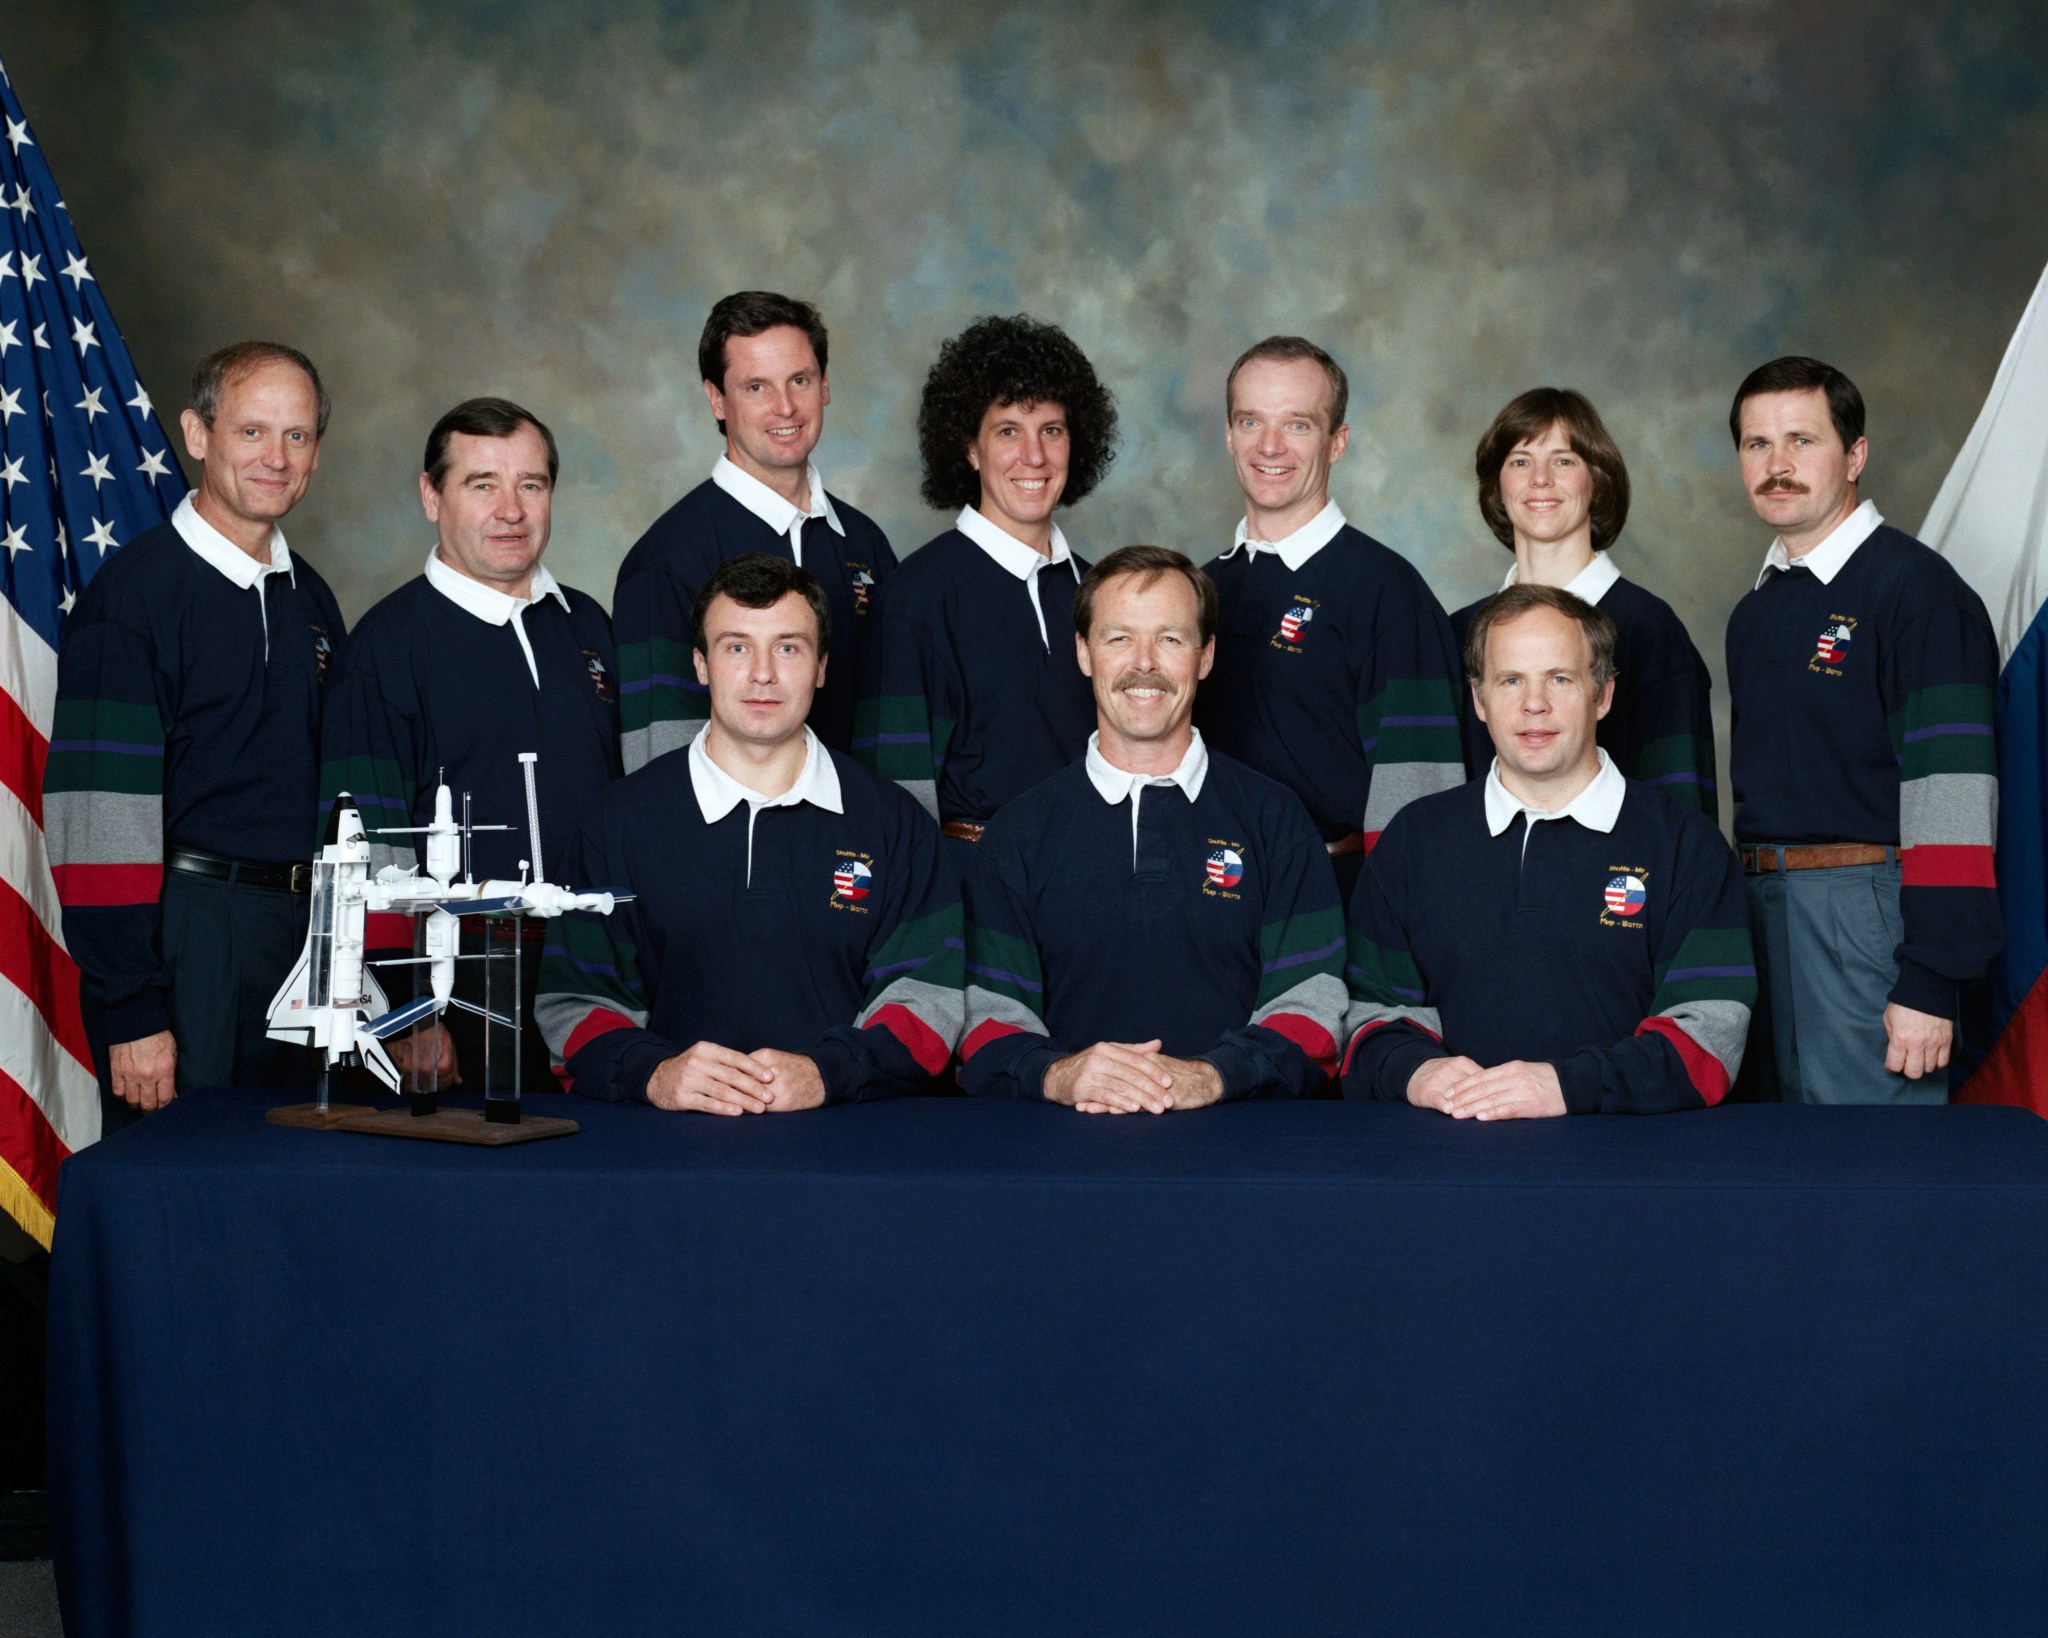 Crew members for the STS-71 mission and the related Mir missions assembled for a crew portrait at JSC. In front are, left to right, Vladimir N. Dezhurov, Robert L. Gibson and Anatoliy Y. Solovyev, mission commanders for Mir-18, STS-71 and Mir-19, respectively. On the back row are, left to right, Norman E. Thagard, Gennadiy M. Strekalov, Gregory J. Harbaugh, Ellen S. Baker, Charles J. Precourt, Bonnie J. Dunbar and Nikolai M. Budarin.